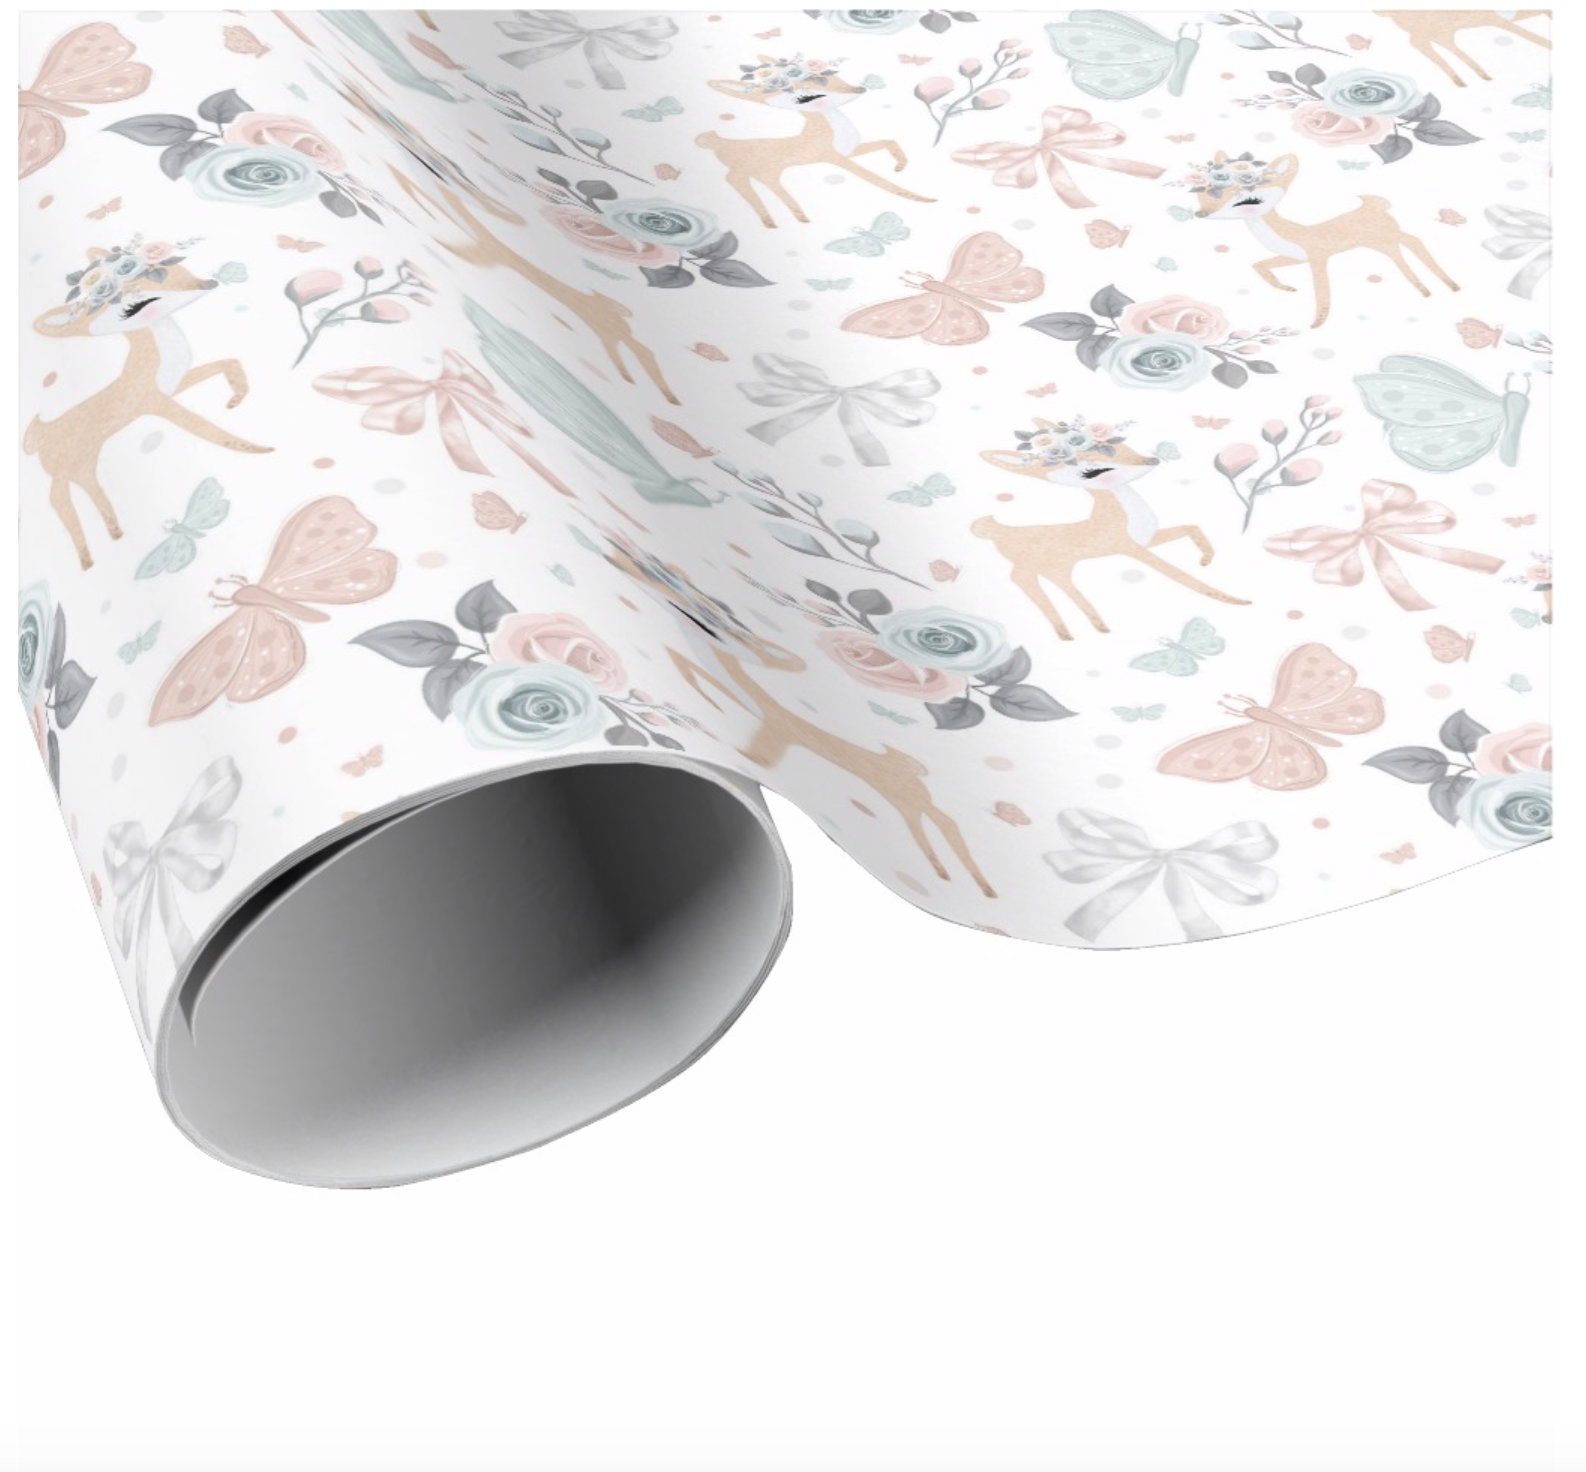 Woodland Baby Animals Gift Wrap by Wrap and Revel—Baby Shower Wrapping  Paper Folded flat, 27 x 39 inches with Deer, Fox, Hedgehog, Bunny Rabbit,  Mouse